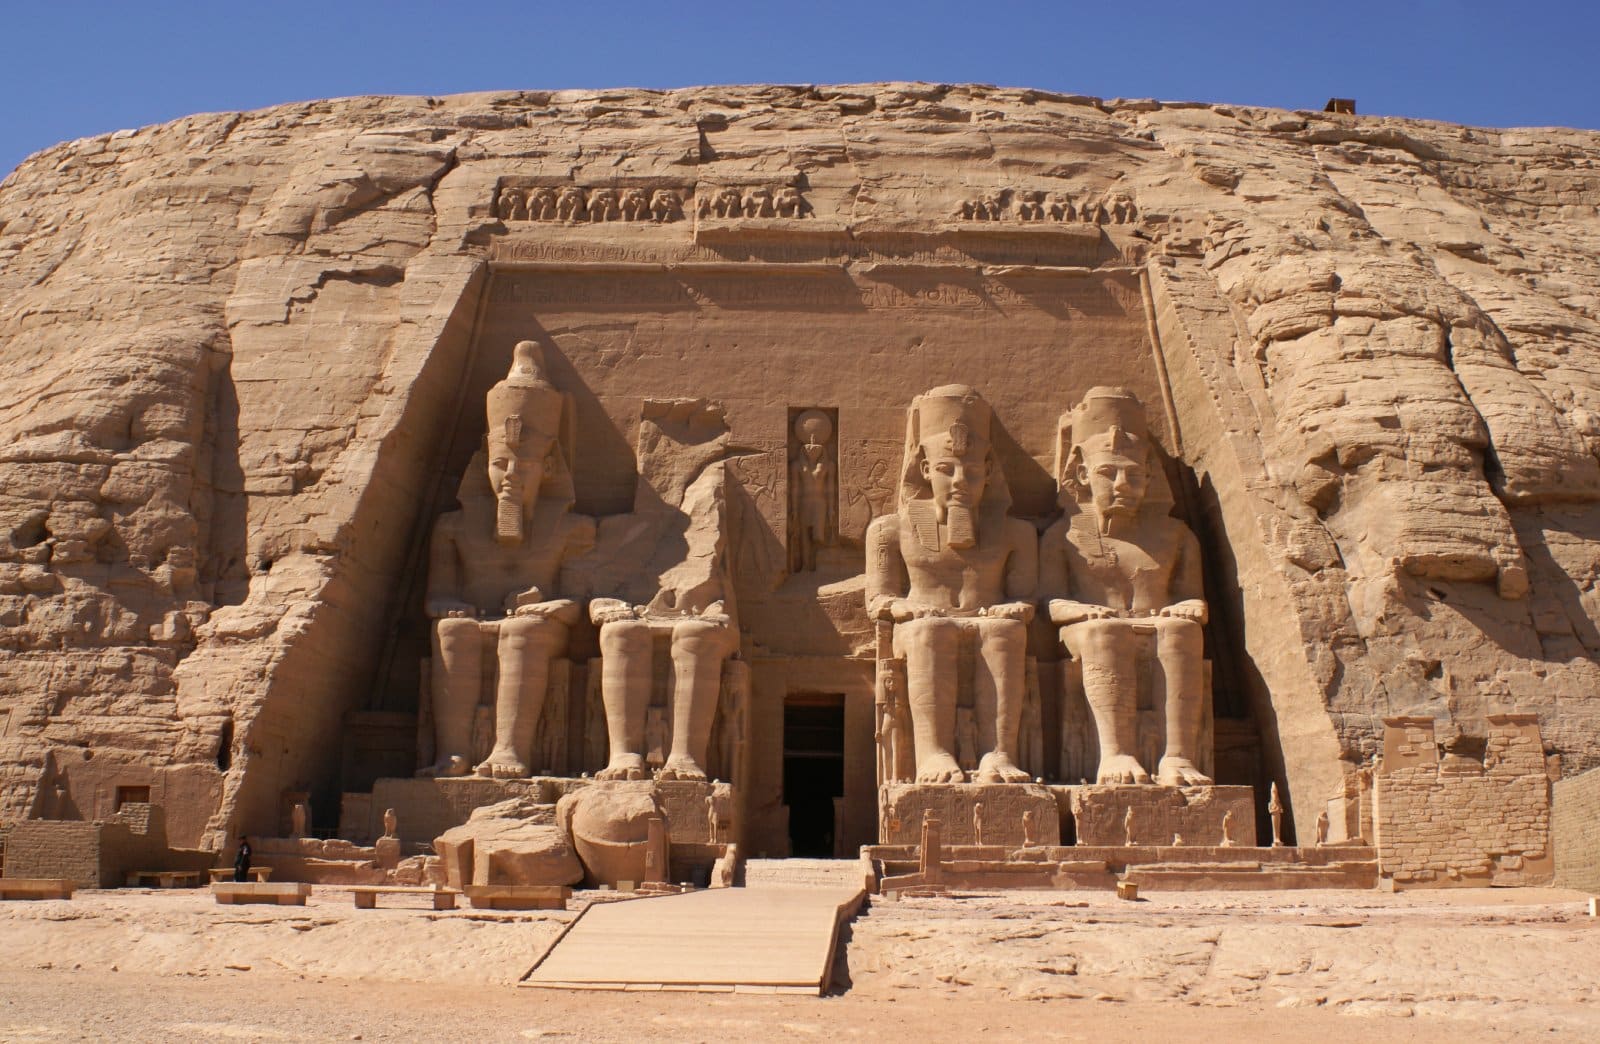 <p class="wp-caption-text">Image Credit: Shutterstock / Beyond the Road Prod</p>  <p><span>The colossal temples of Abu Simbel, carved out of a mountainside by Pharaoh Ramses II, are a monumental sight. The complex was also relocated in a historic preservation effort and aligns with the sun twice a year to illuminate the inner sanctum.</span></p>